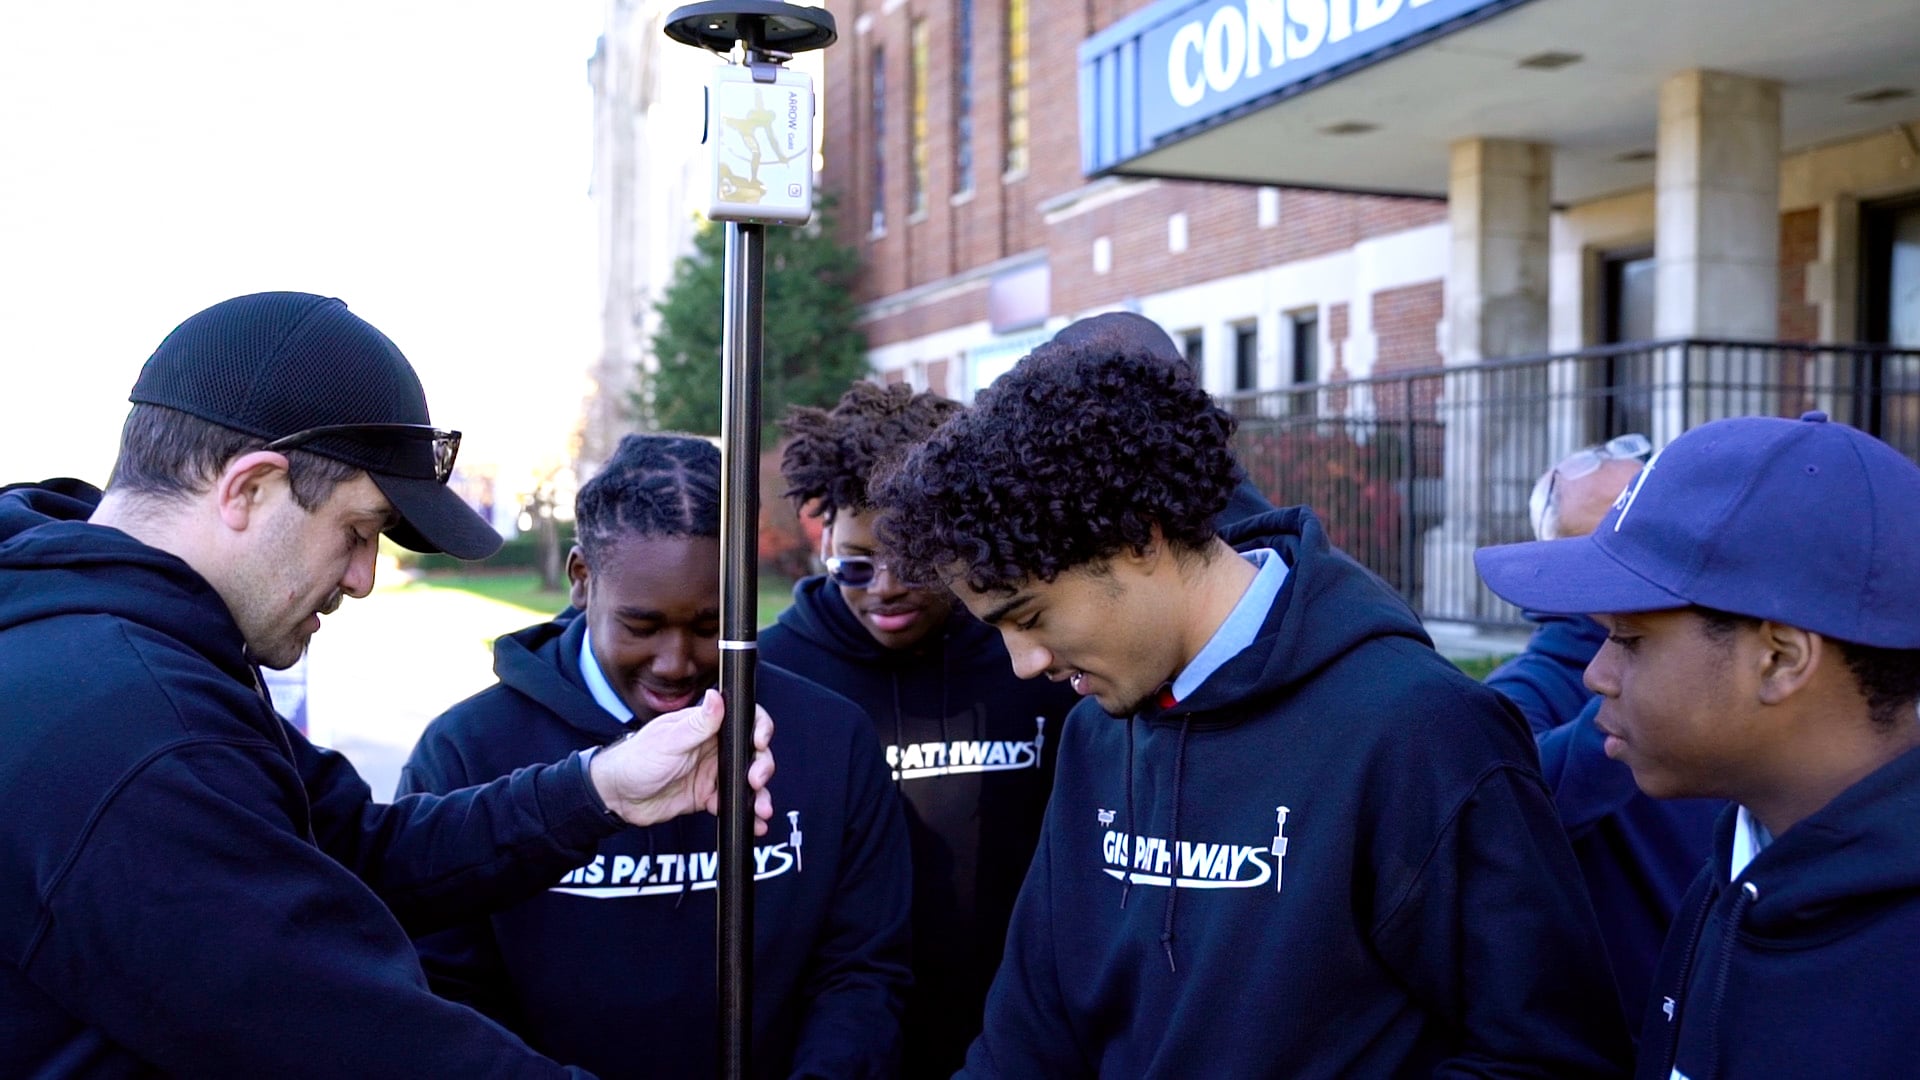 GIS Pathways students in Detroit, Michigan learn high-acuracy GNSS and GIS with Eos Arrow Gold receivers